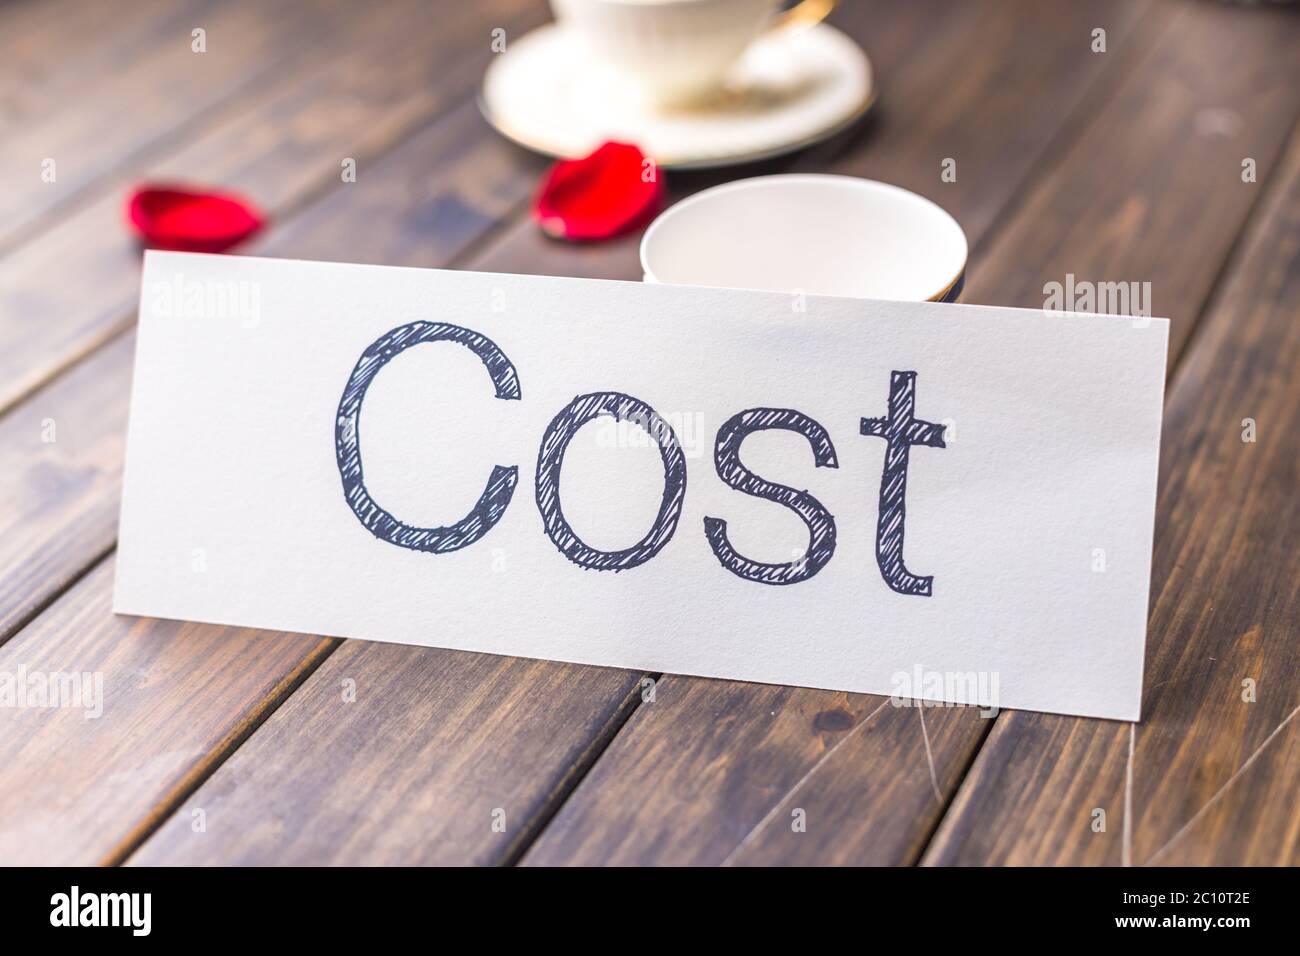 cost on white paper in cafe Stock Photo